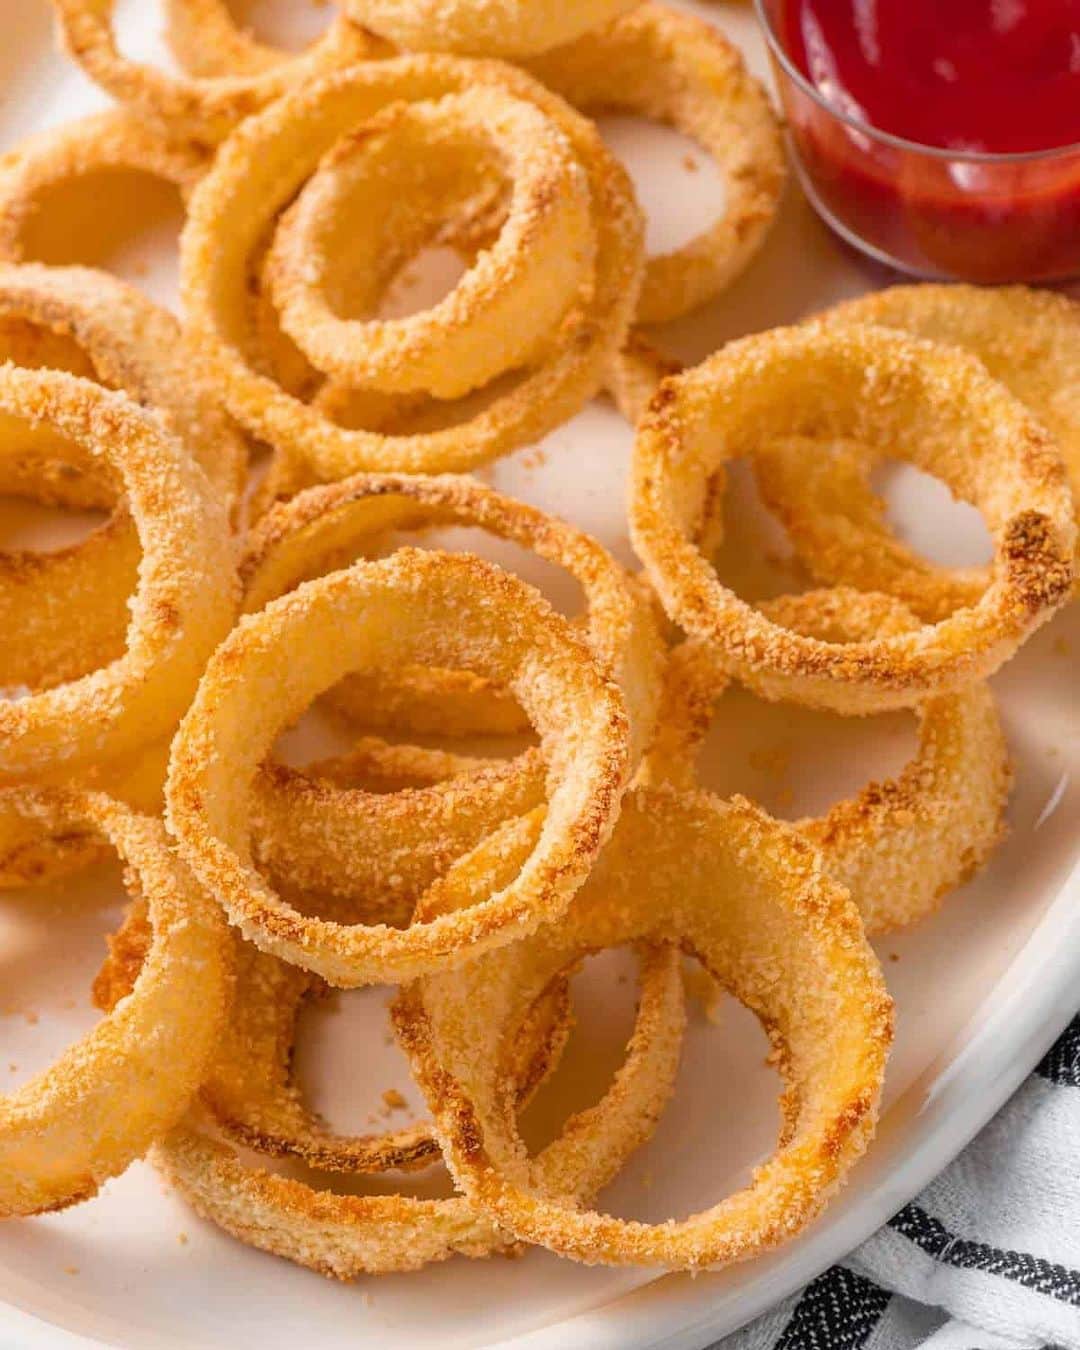 Easy Recipesのインスタグラム：「Making homemade onion rings oven style is healthier and just as delicious as deep fried onion rings but with less fat, fewer calories, and way less mess. Serve as a snack or a side dish with your favorite dipping sauce.  Full recipe link in my bio @cookinwithmima  https://www.cookinwithmima.com/oven-baked-onion-rings/」